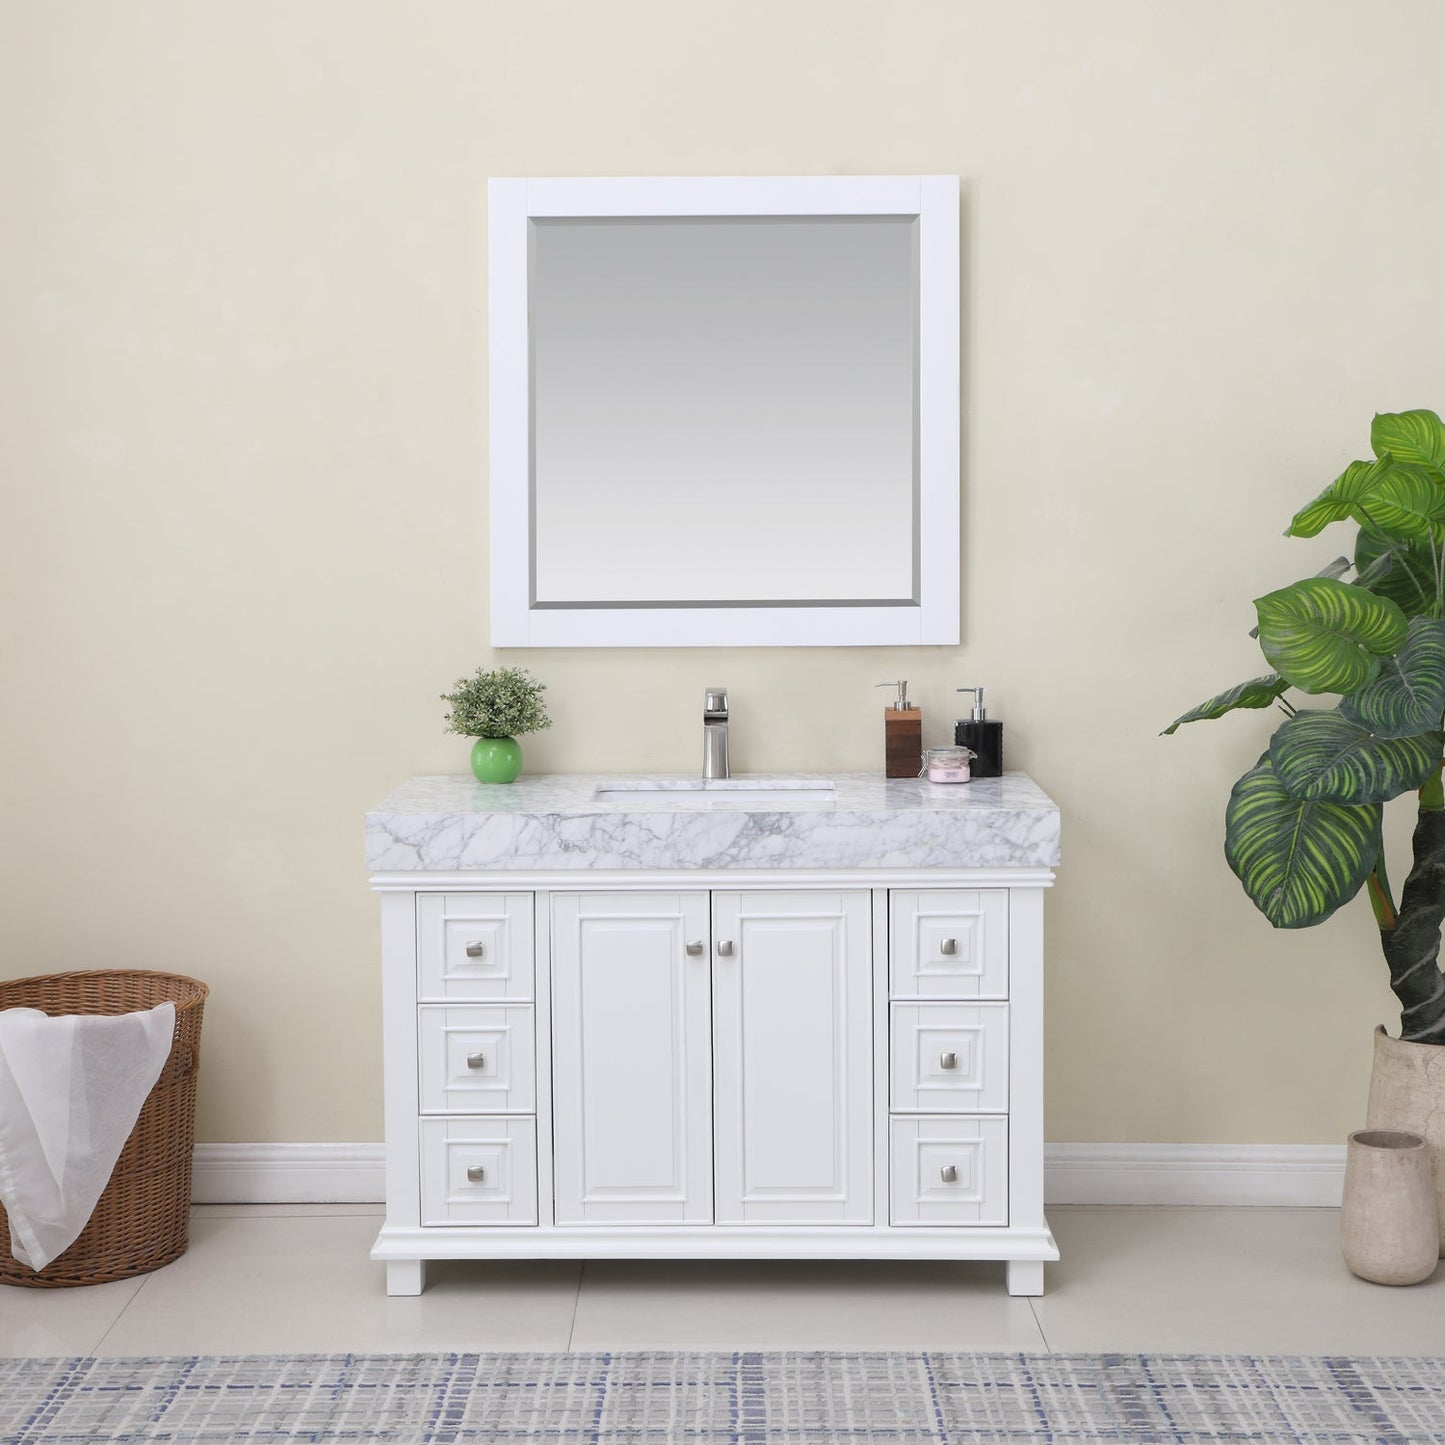 Jardin 48" Single Bathroom Vanity Set in White and Carrara White Marble Countertop with Mirror